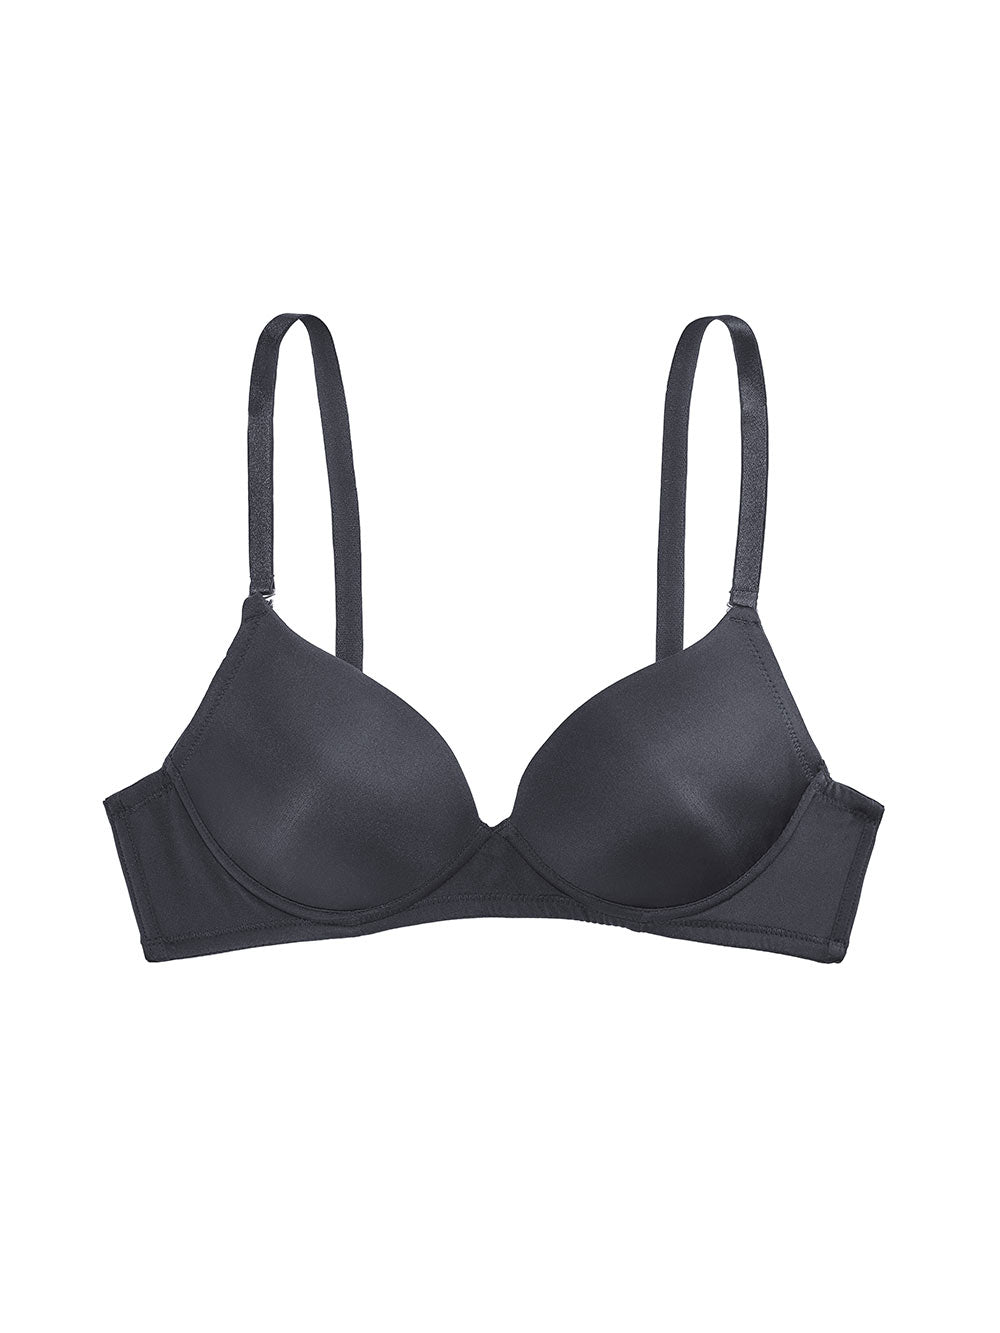 SKINN INTIMATE Basic Skin Up 2 Cup Lace Push Up Bra (Made in Korea) 